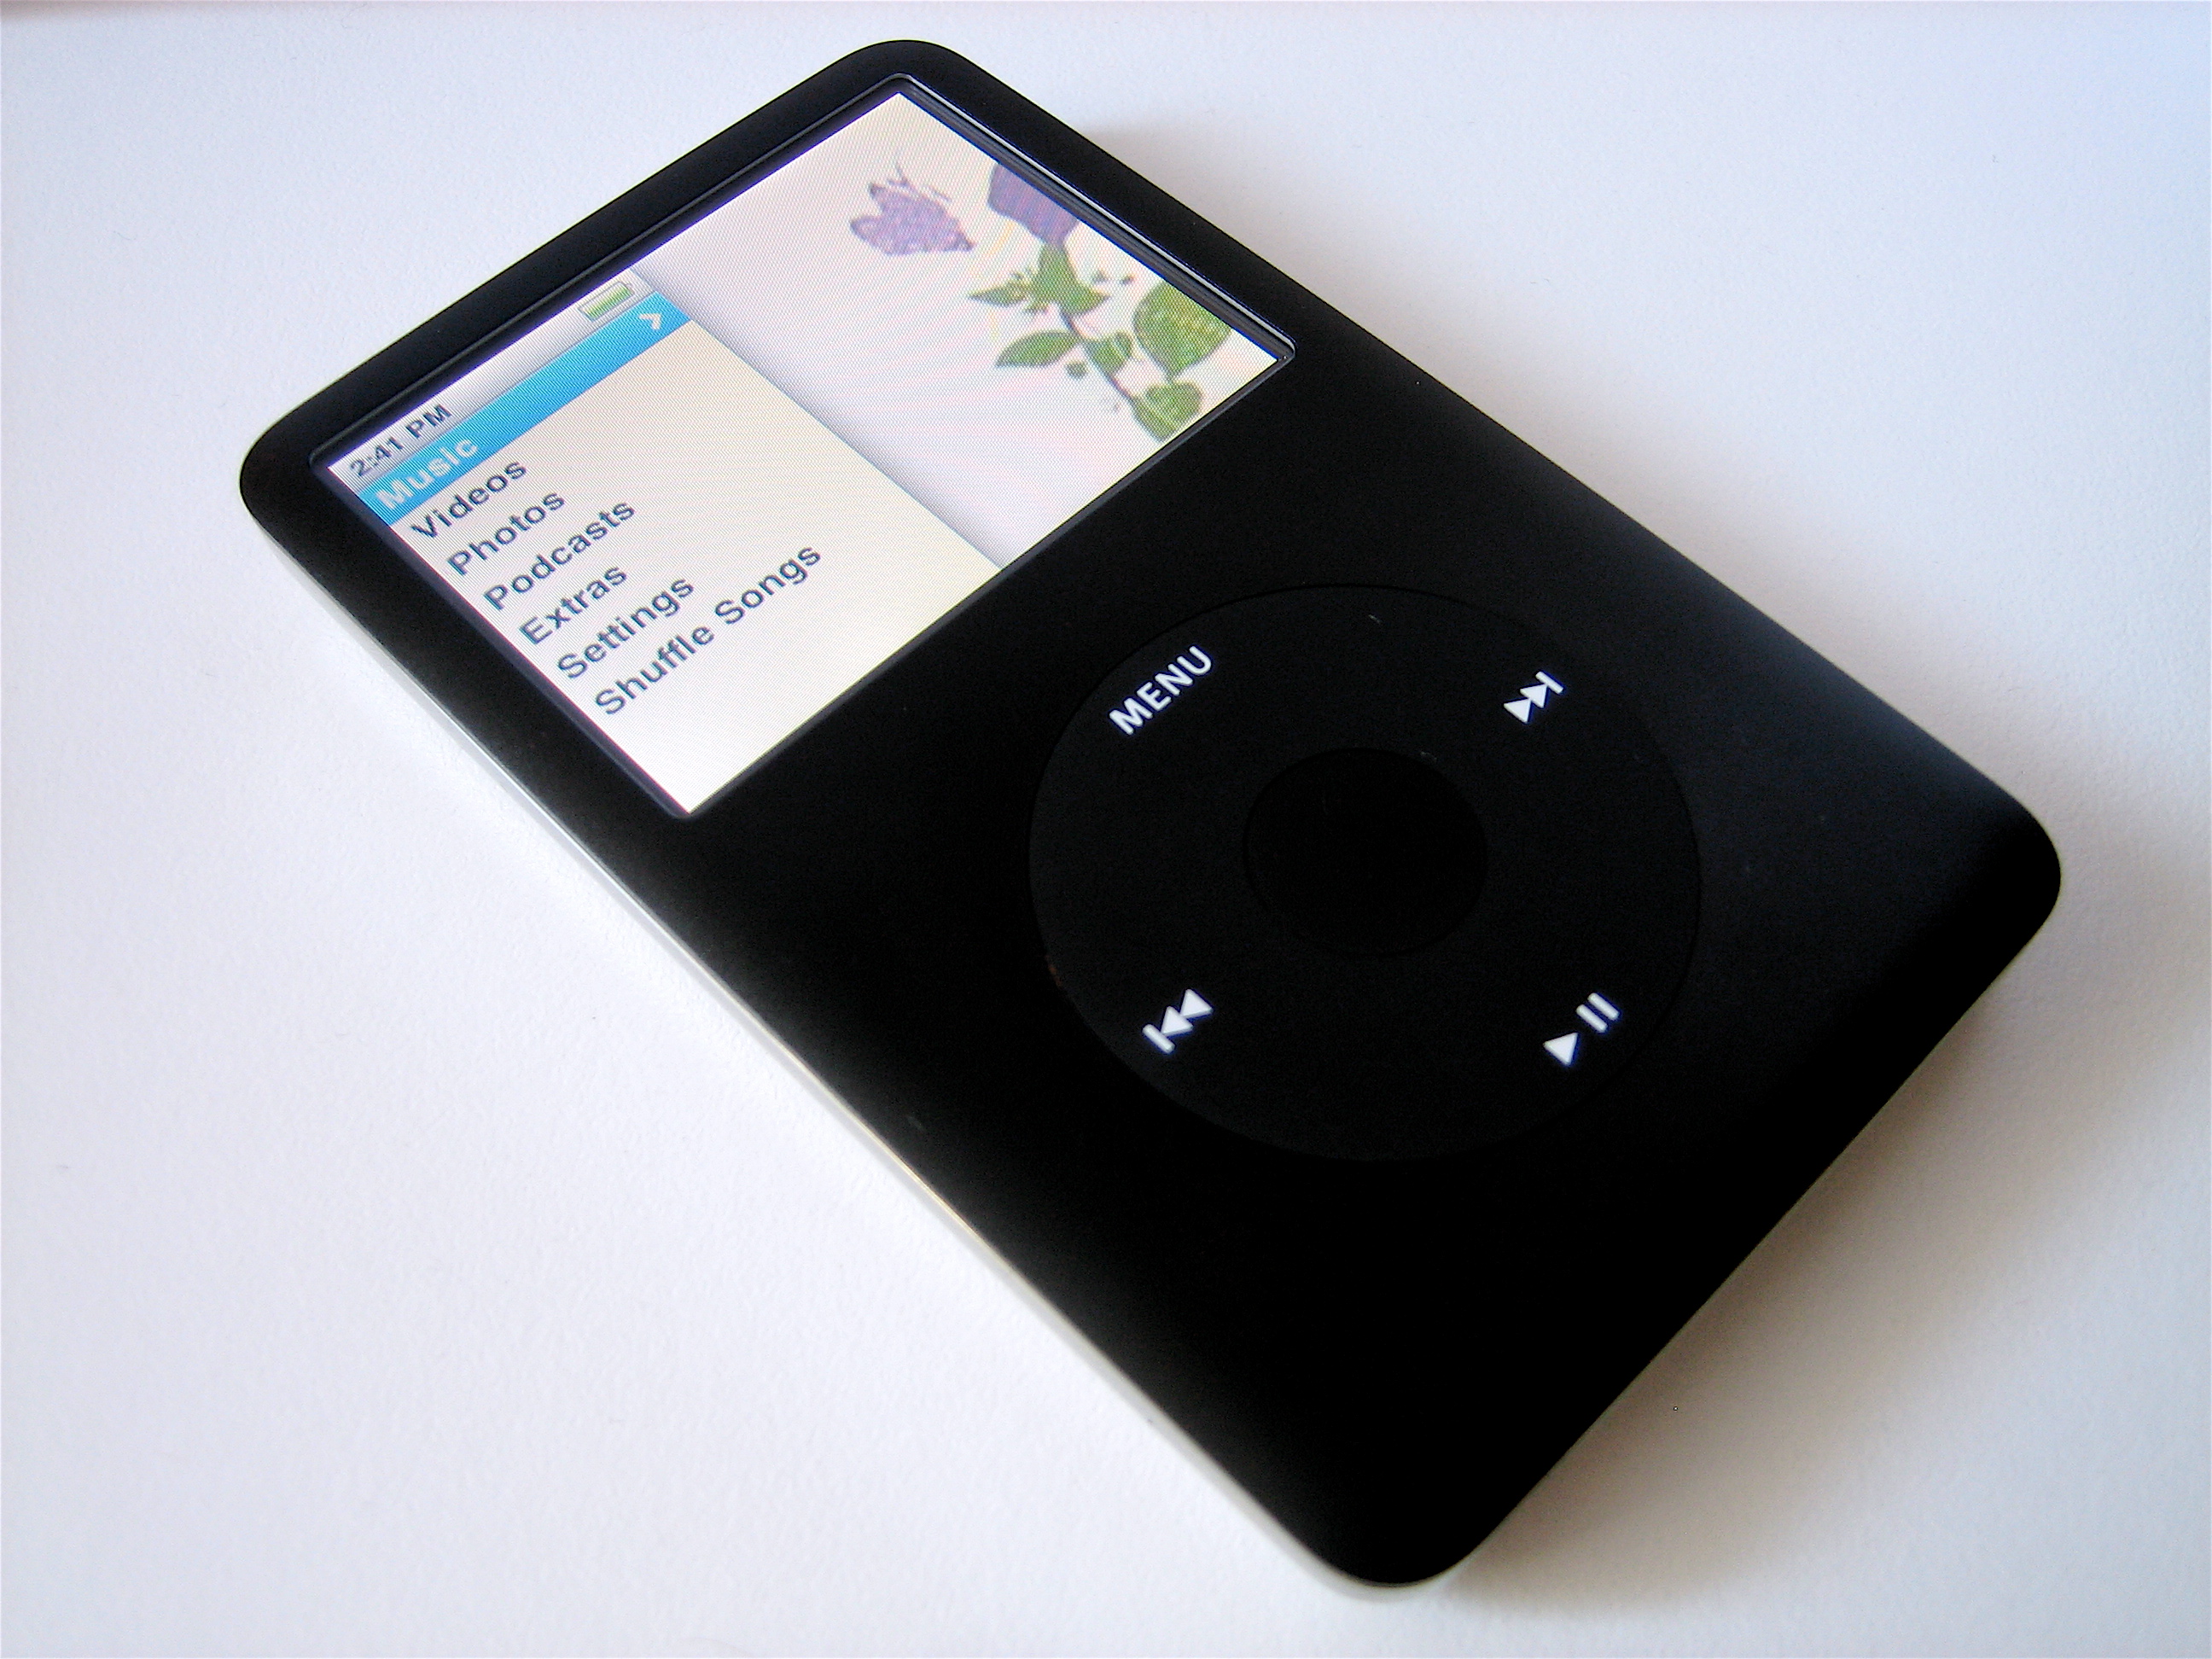 download the new version for ipod StartIsBack++ 3.6.13